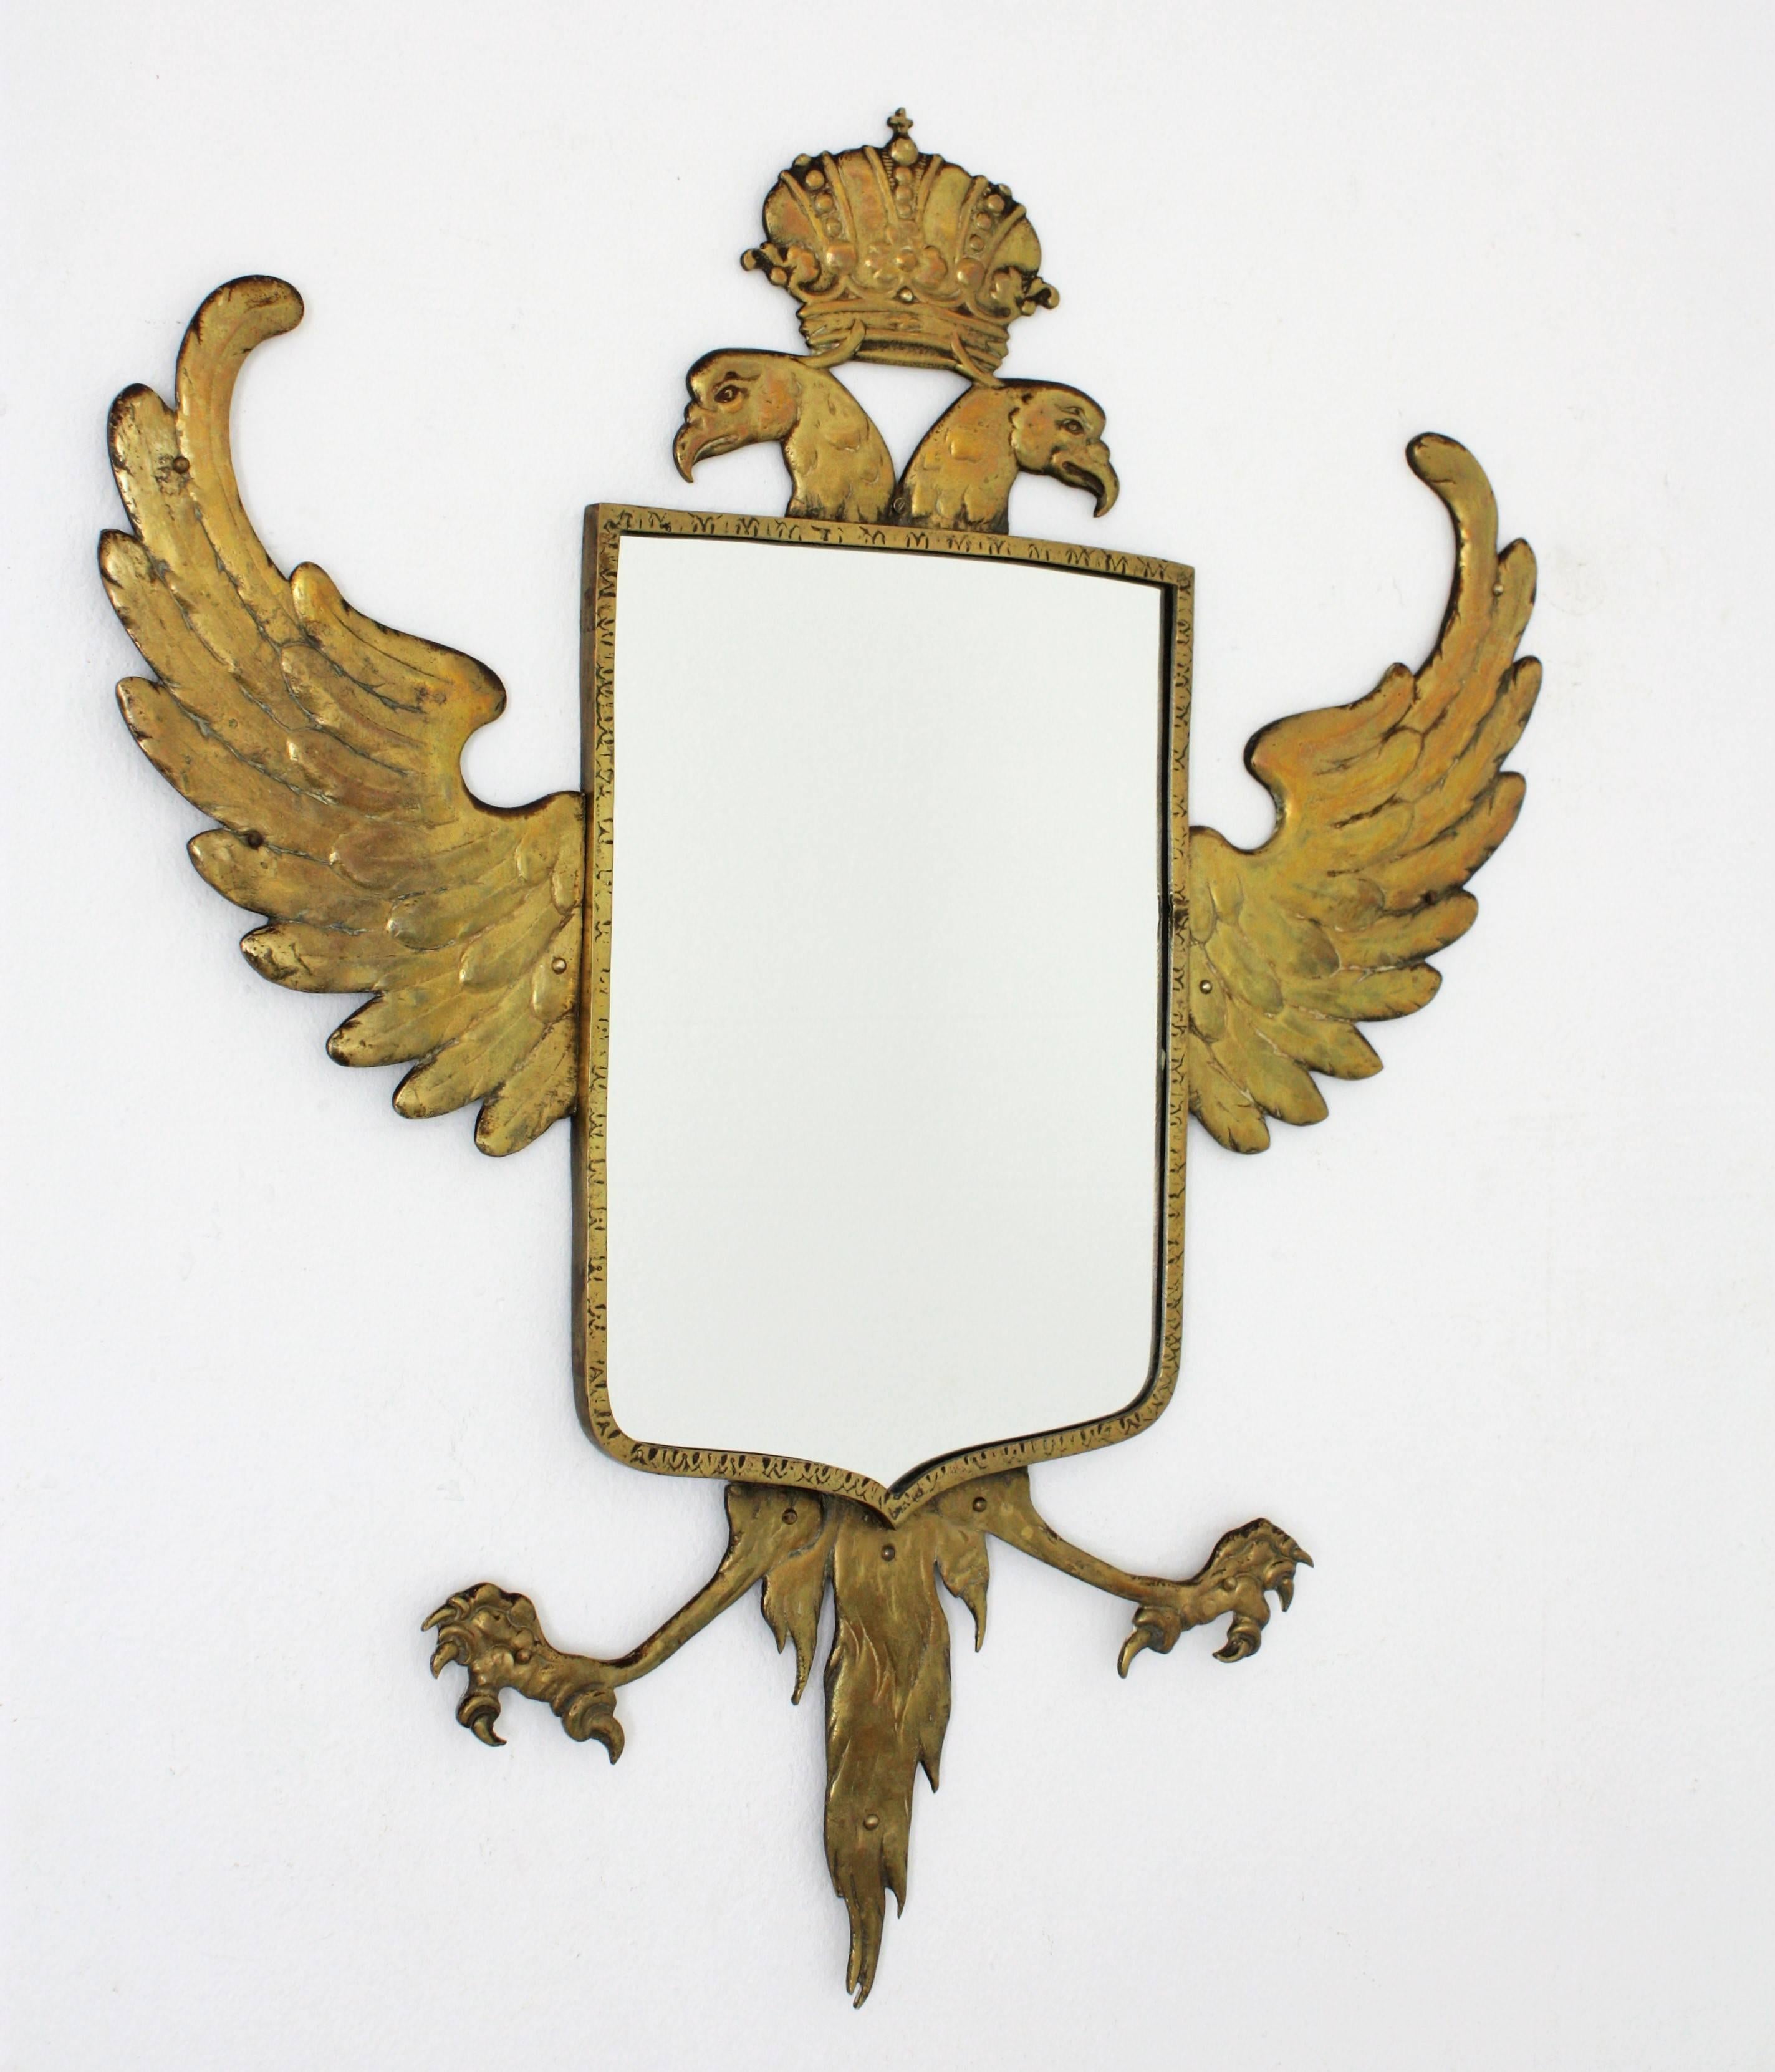 Spectacular bronze wall mirror with a crowned double headed eagle surrounding a coat of arms shaped glass. A double headed eagle with wide open wings and a crown finished by a small cross. The bronze work is full of realistic details to make this